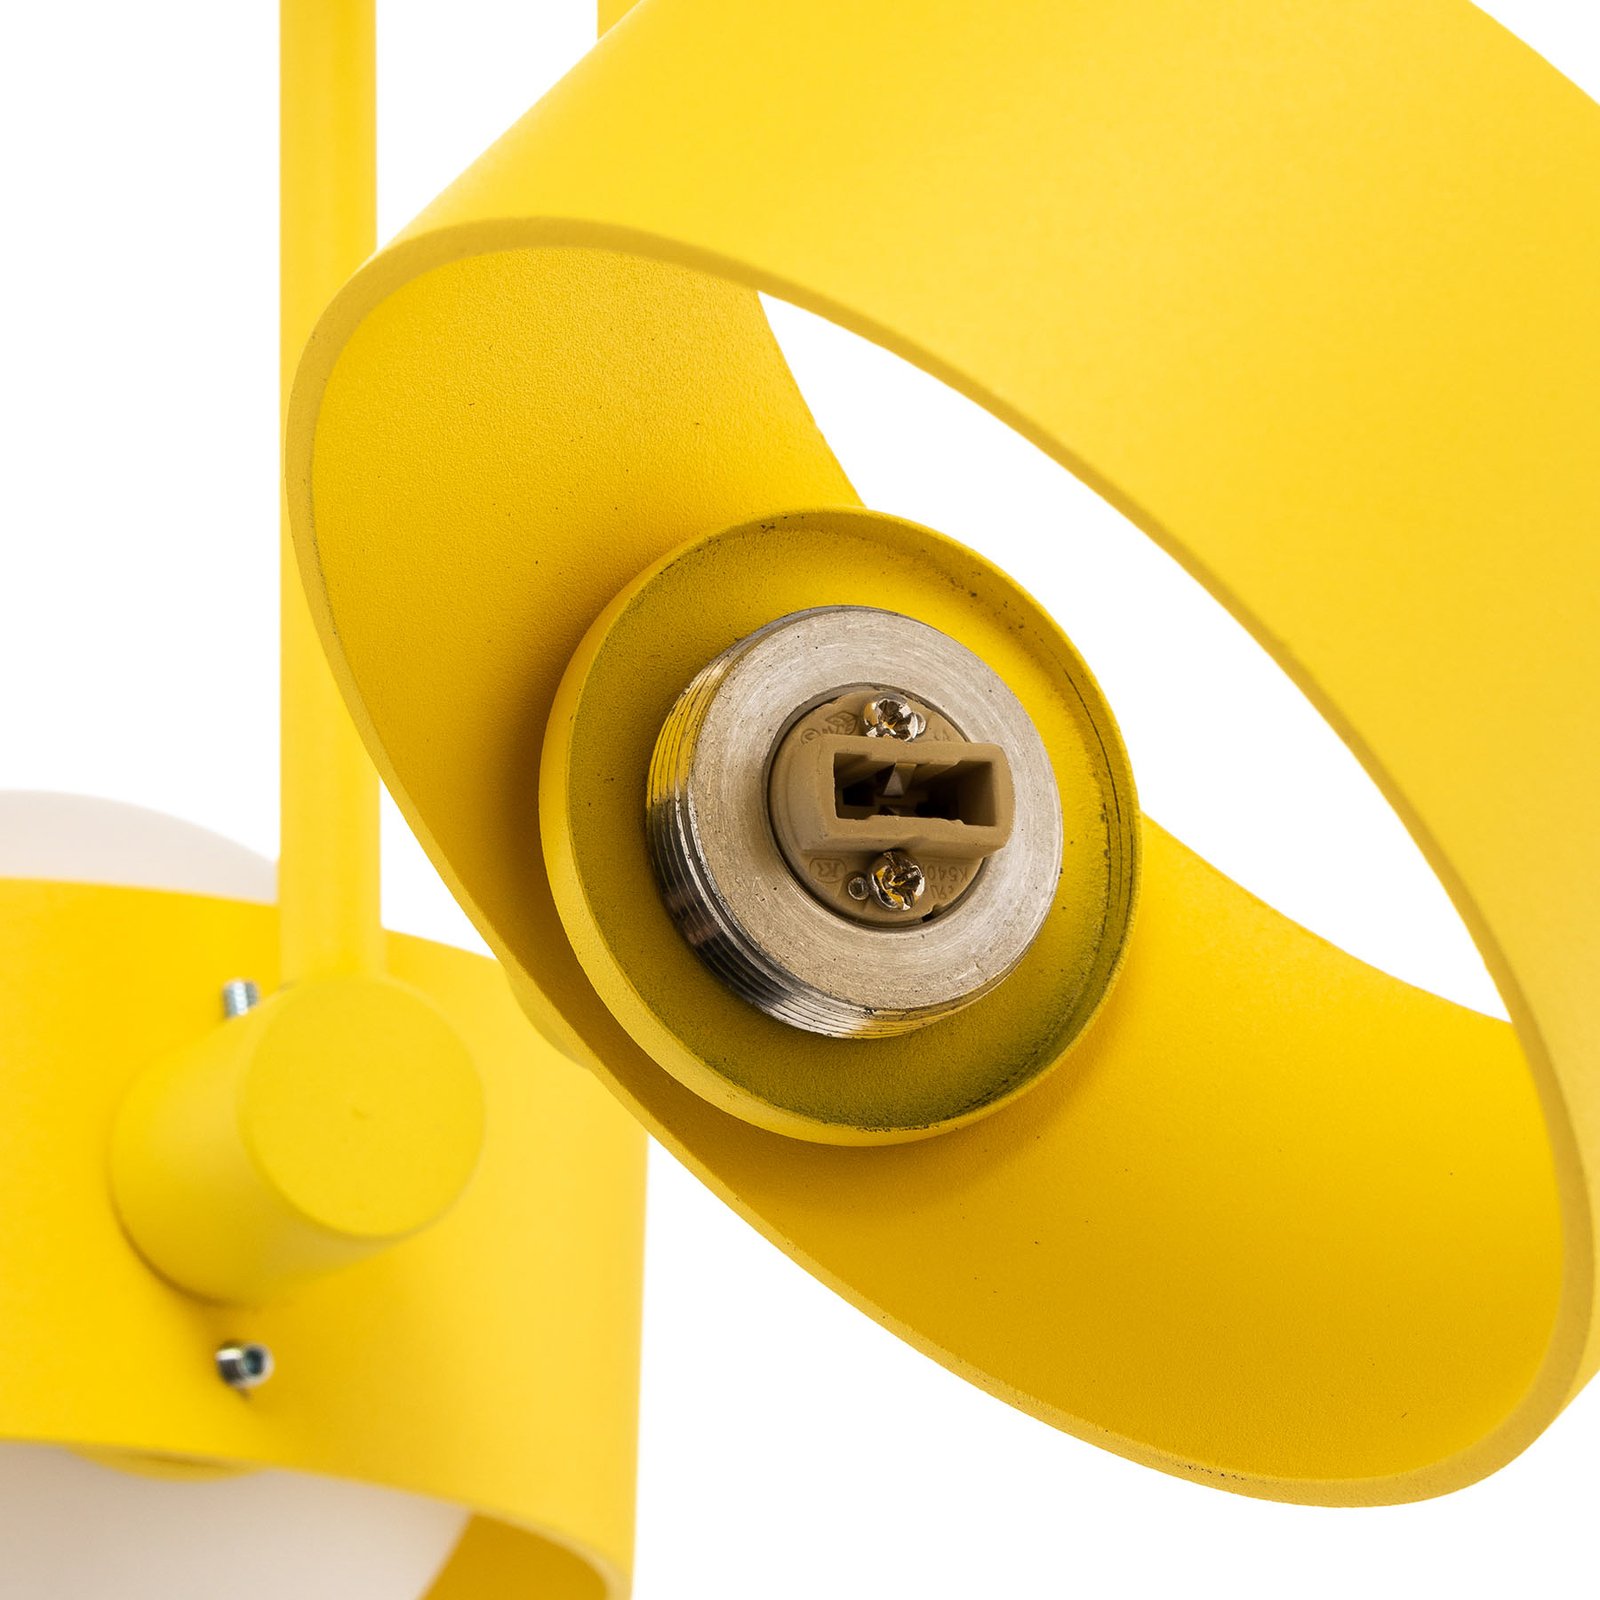 Mado ceiling light, steel, yellow, two-bulb